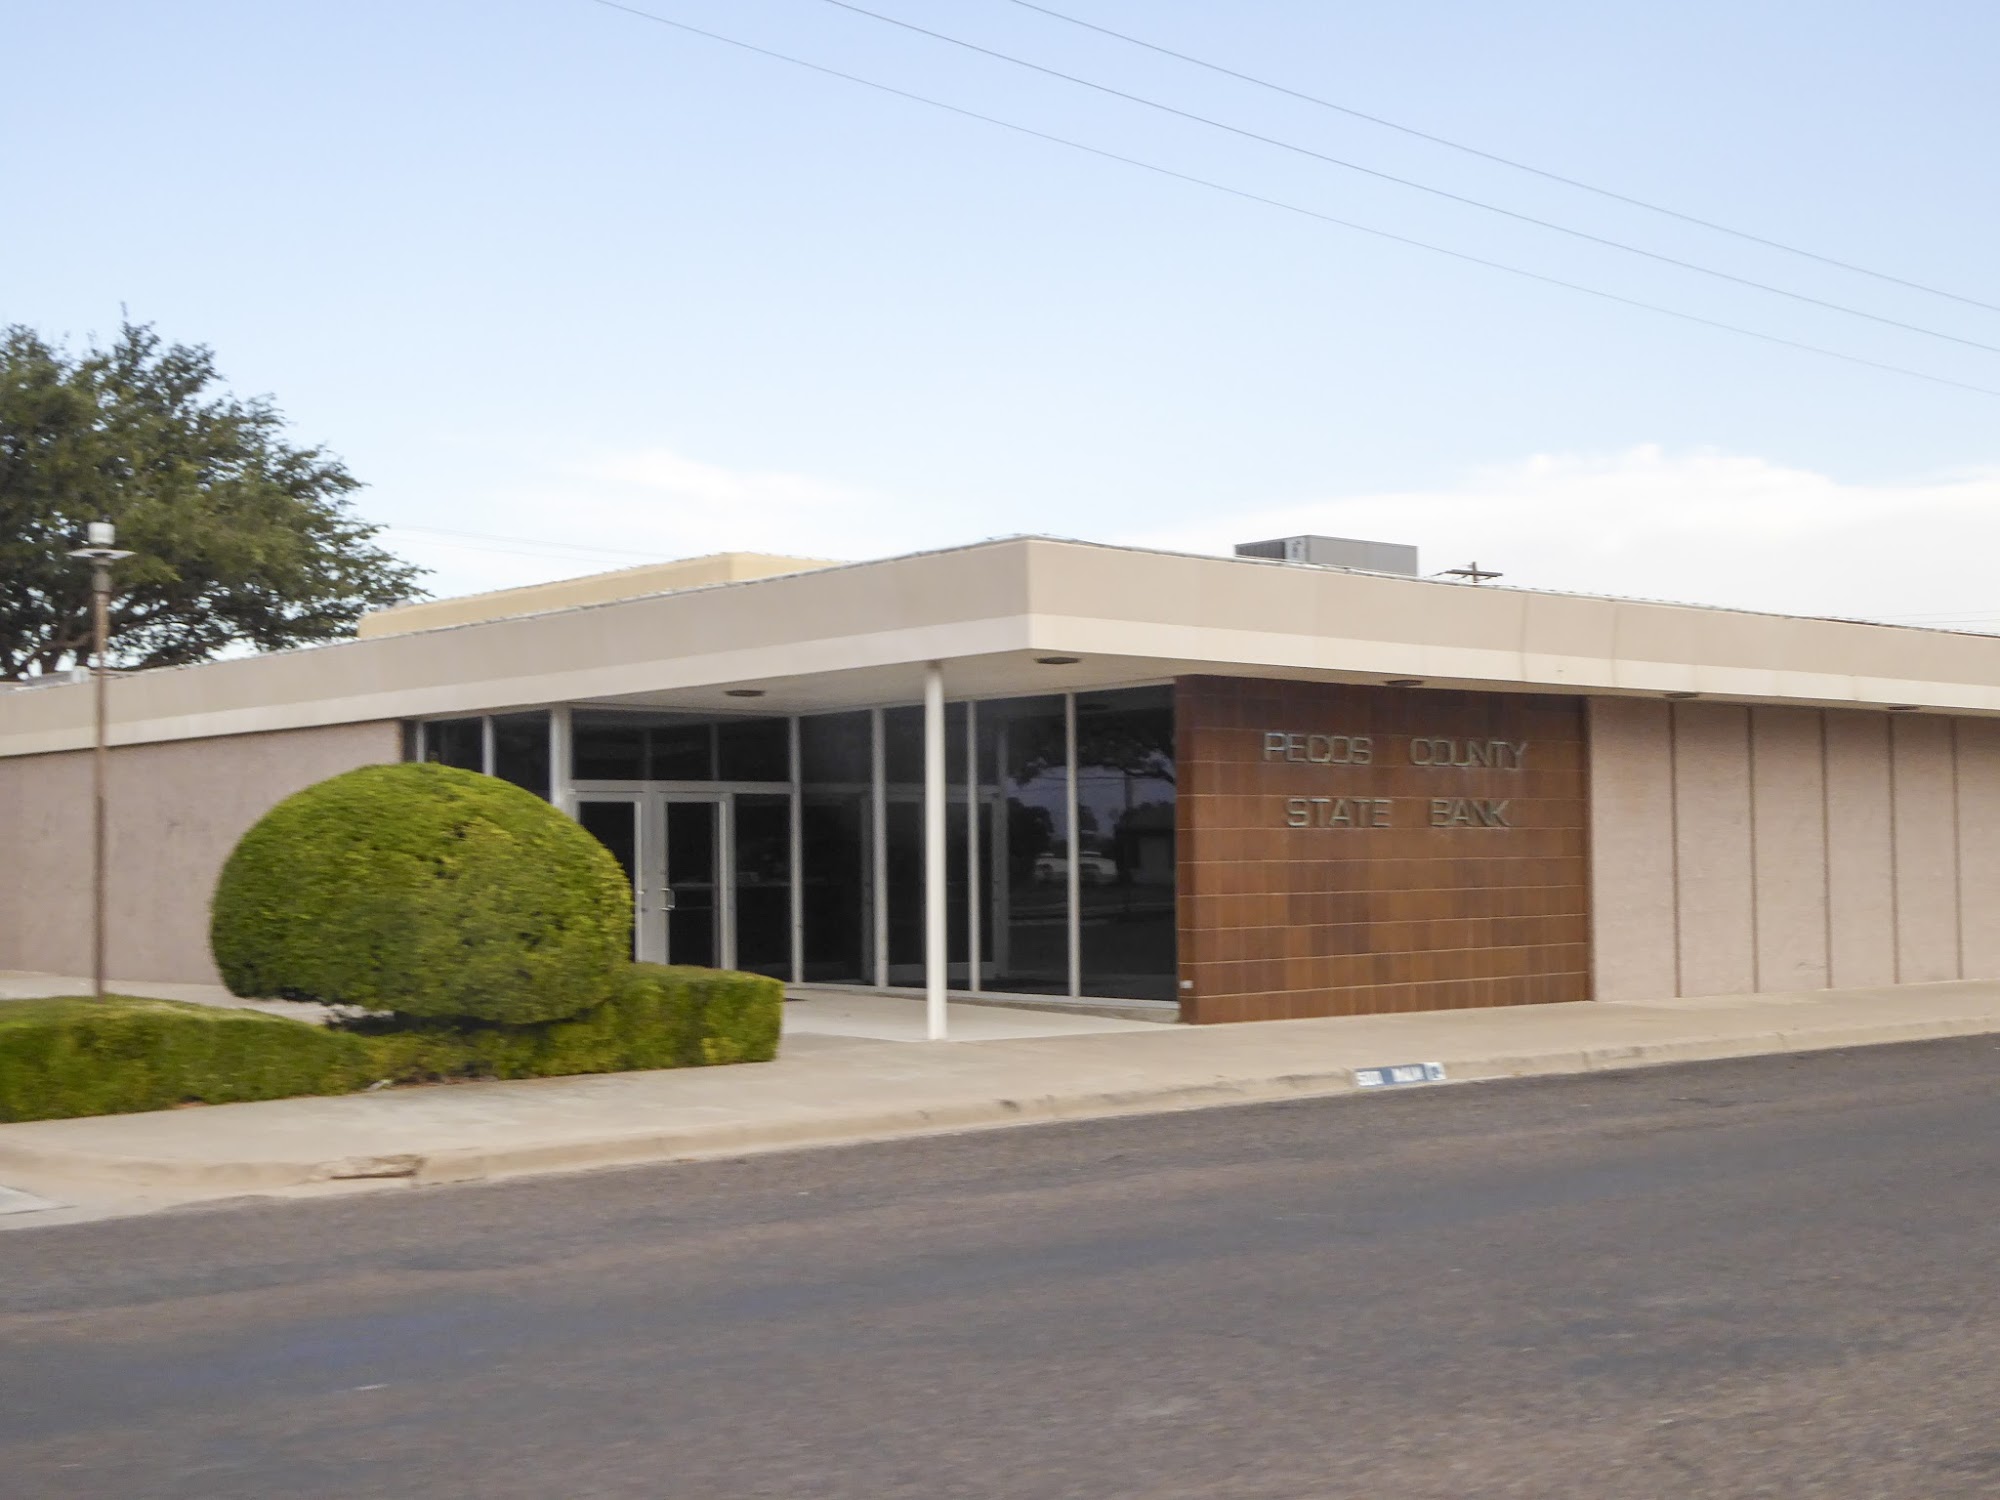 Pecos County State Bank